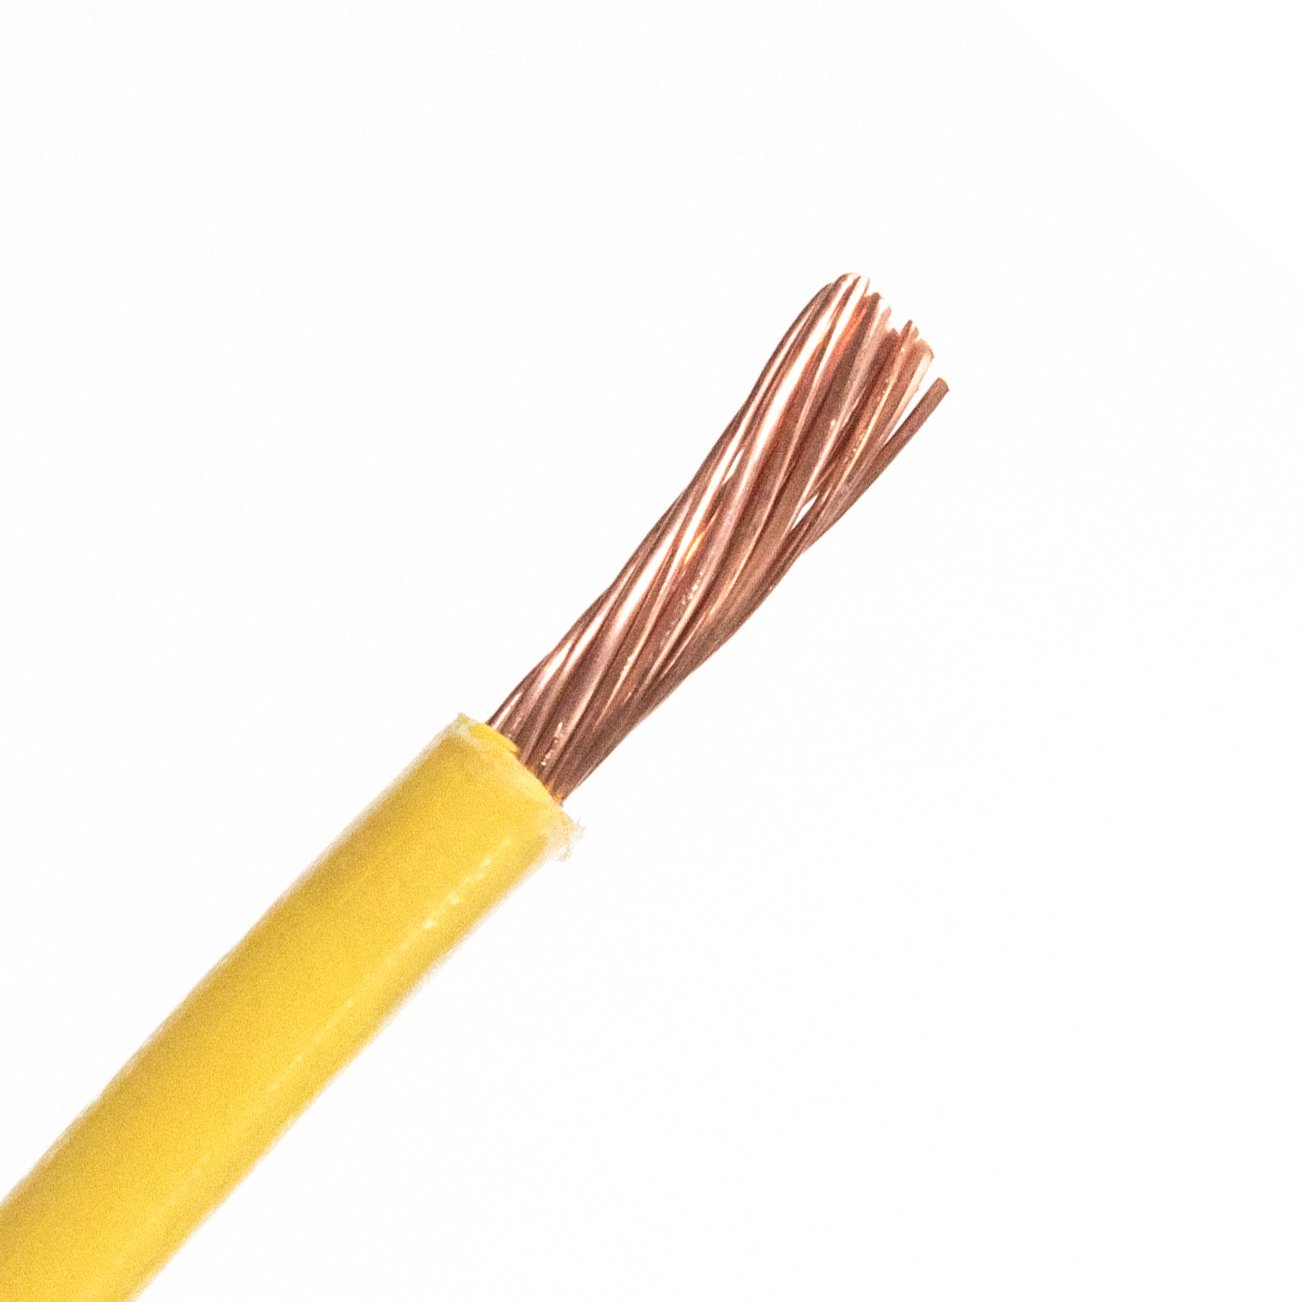 6 AWG High Temperature Type MG Wire 450C